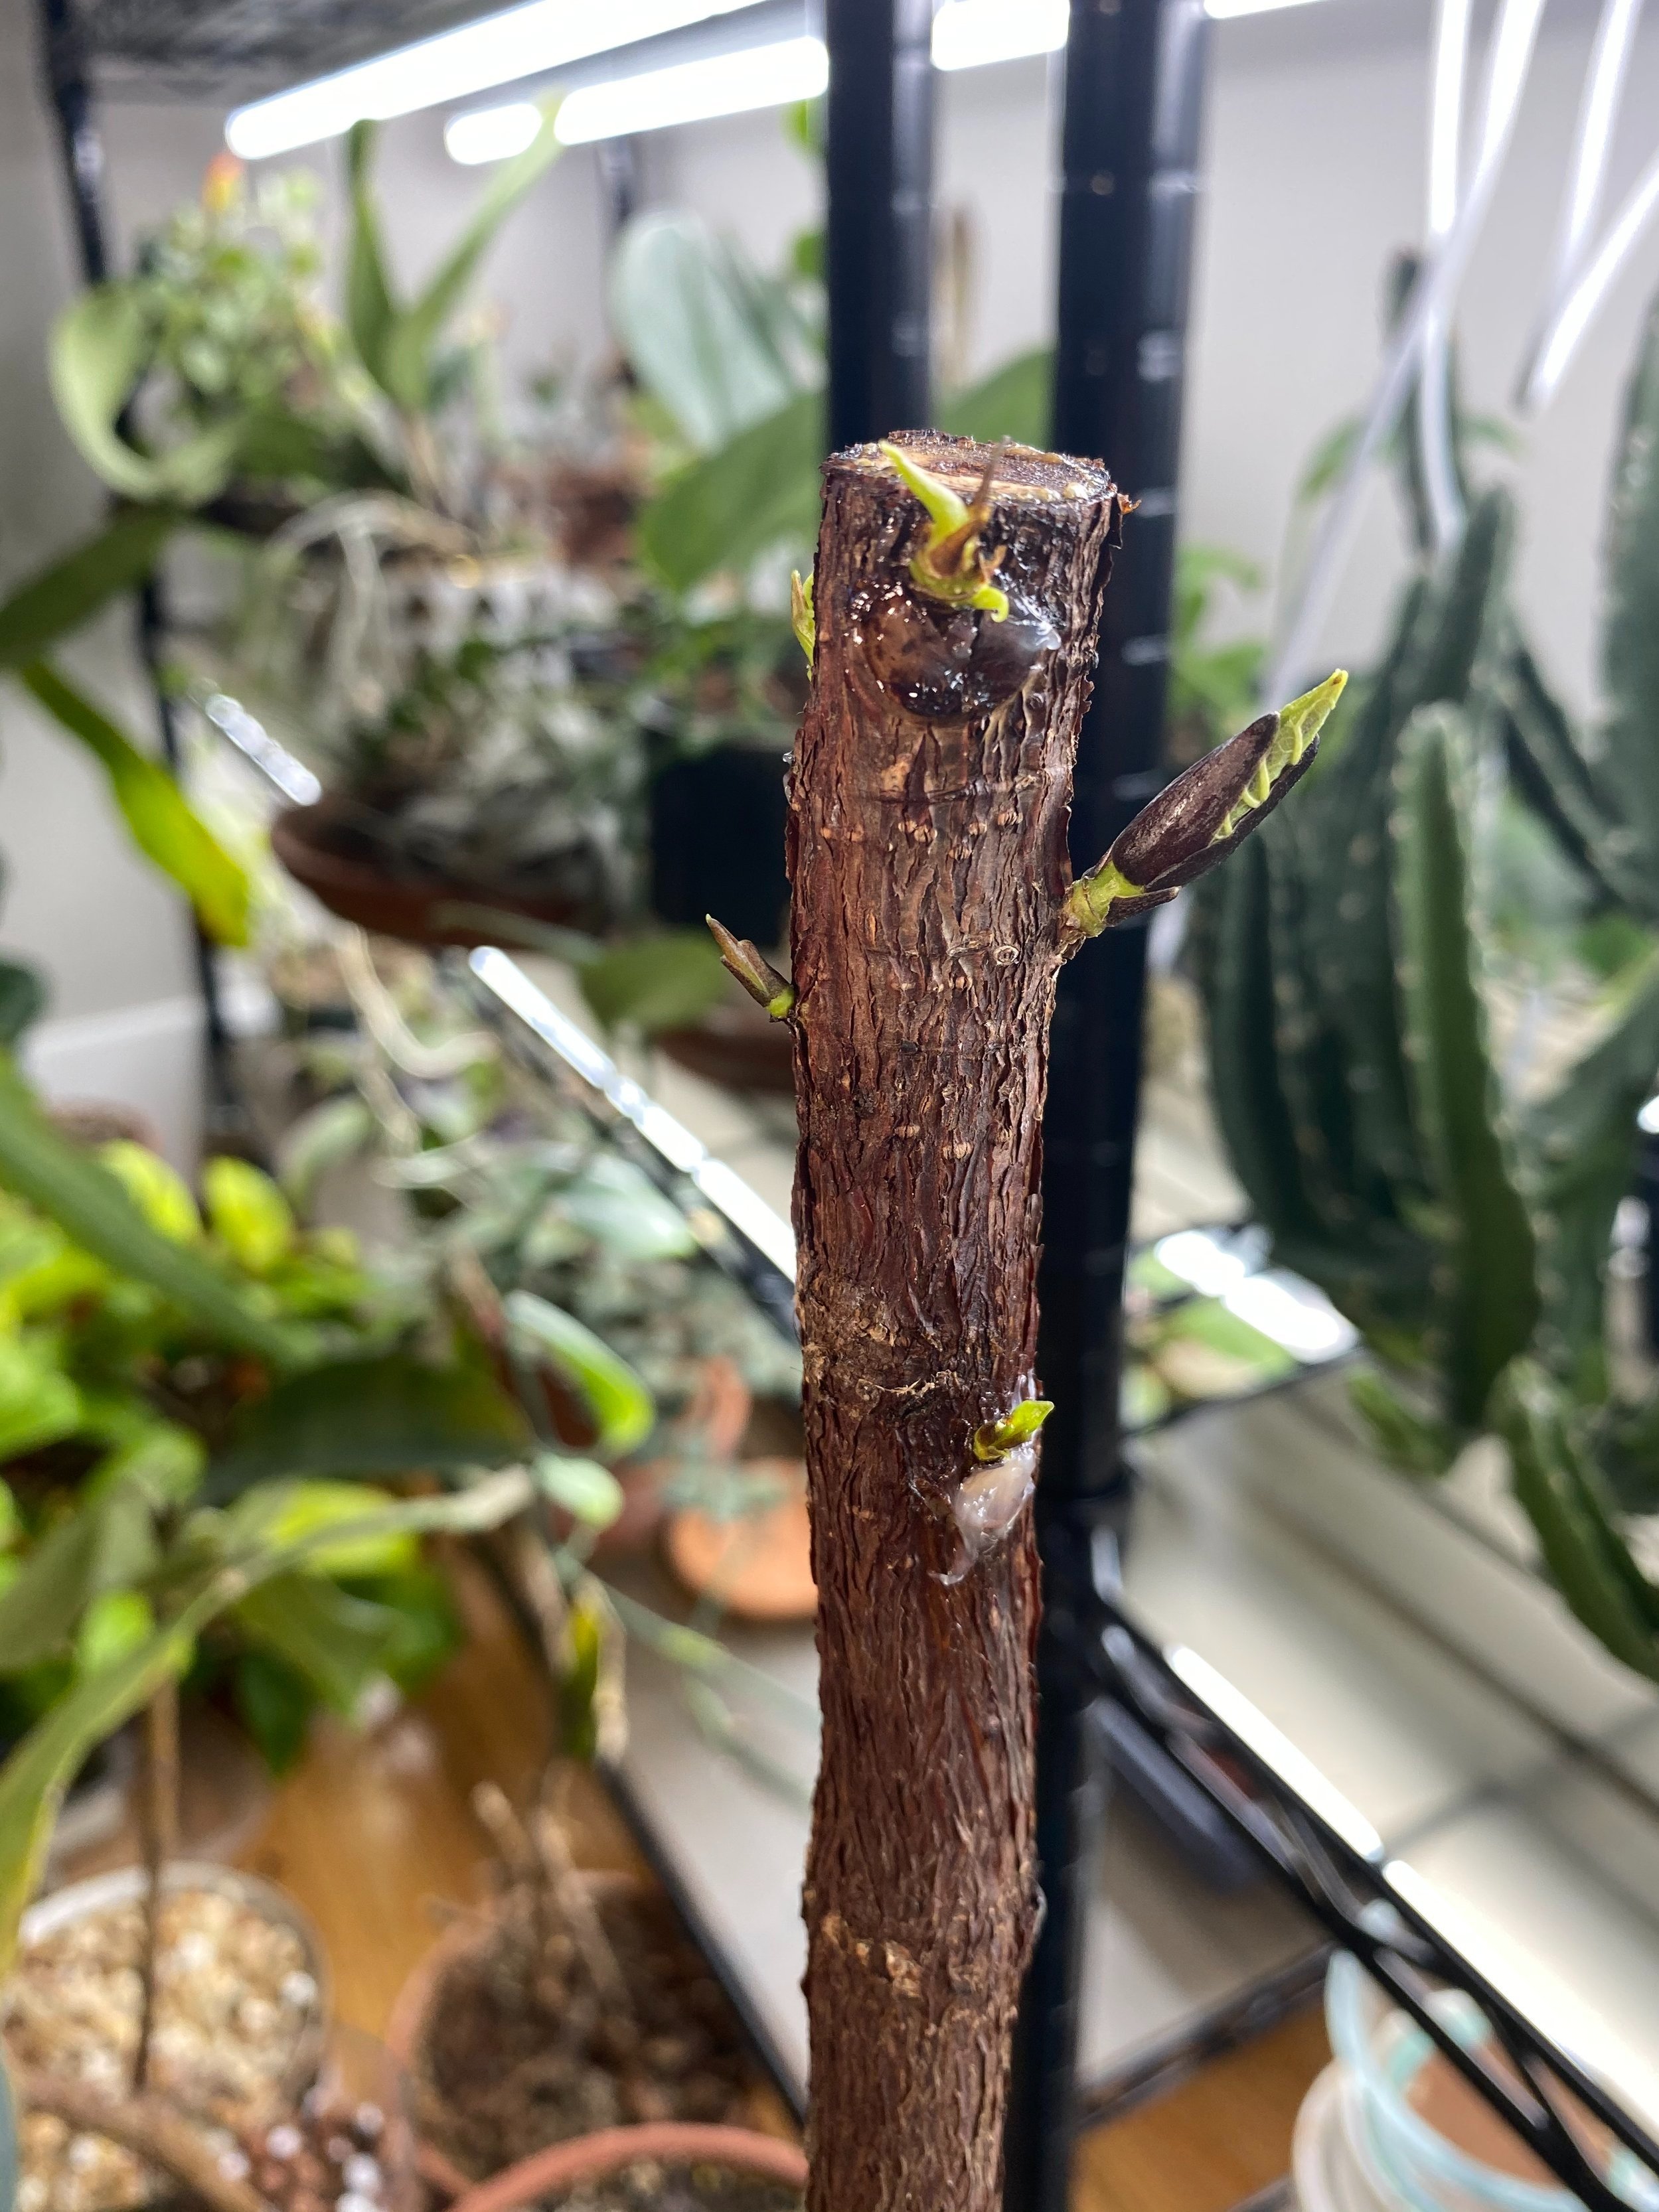  Unfortunately, even with all the new shoots that sprouted, most of them didn’t go further. The strongest two became dominant, and eventually became the new growth that this Fiddle Leaf Fig is continuing to work on, but at a substantially shorter hei